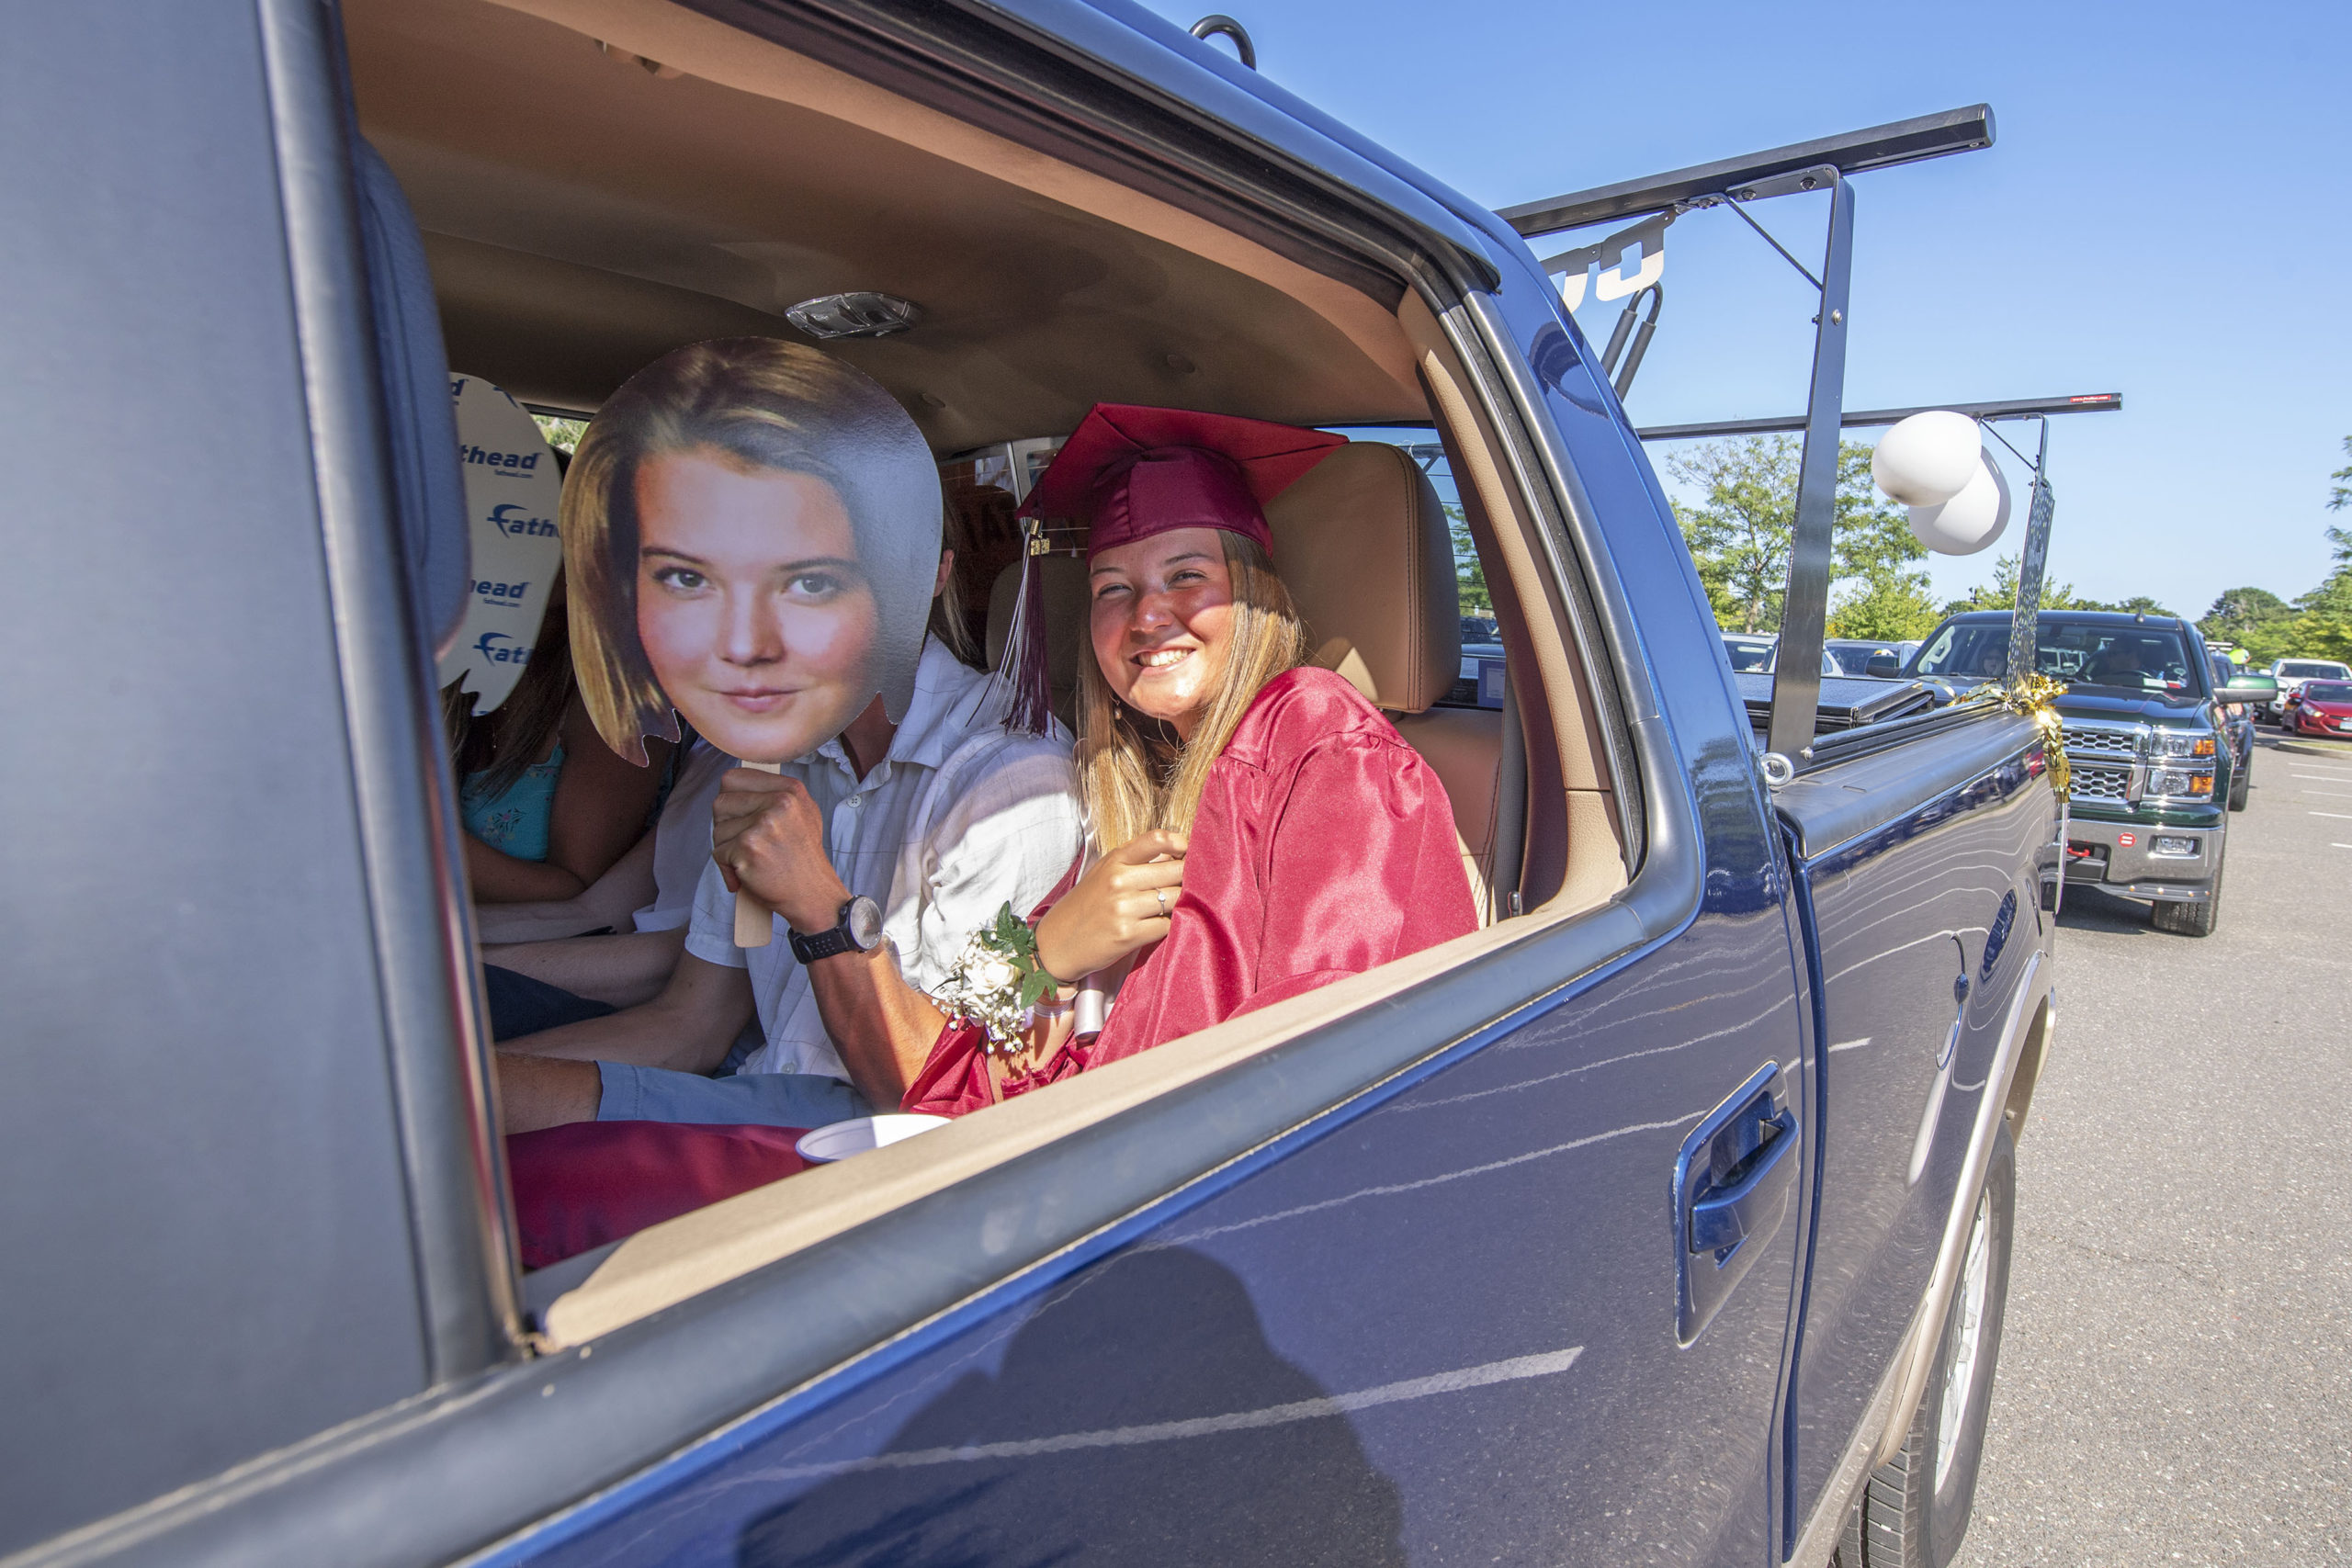 East Hampton High School Senior Christina Brierley waits in line to receive her diploma during the 2020 graduation ceremony at the East Hampton High School on Friday.